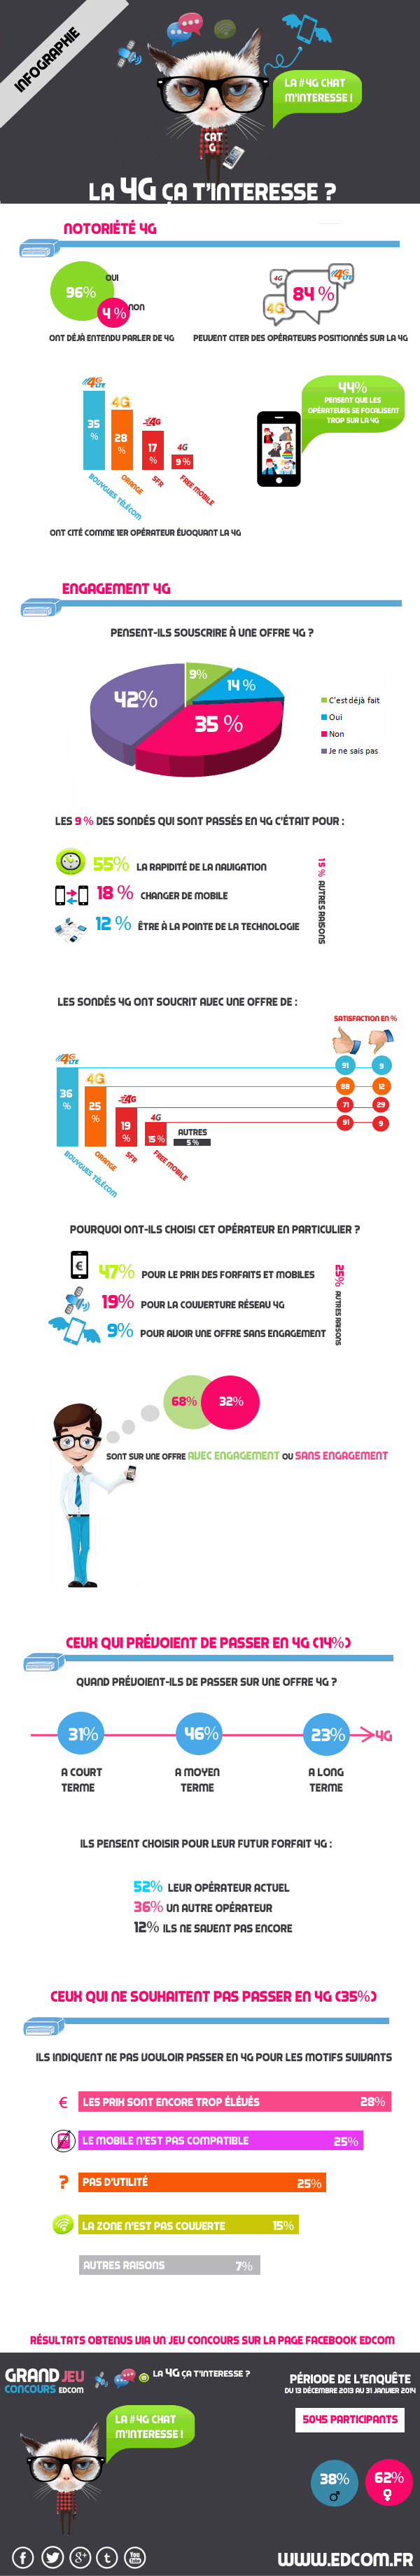 Infographie 4G